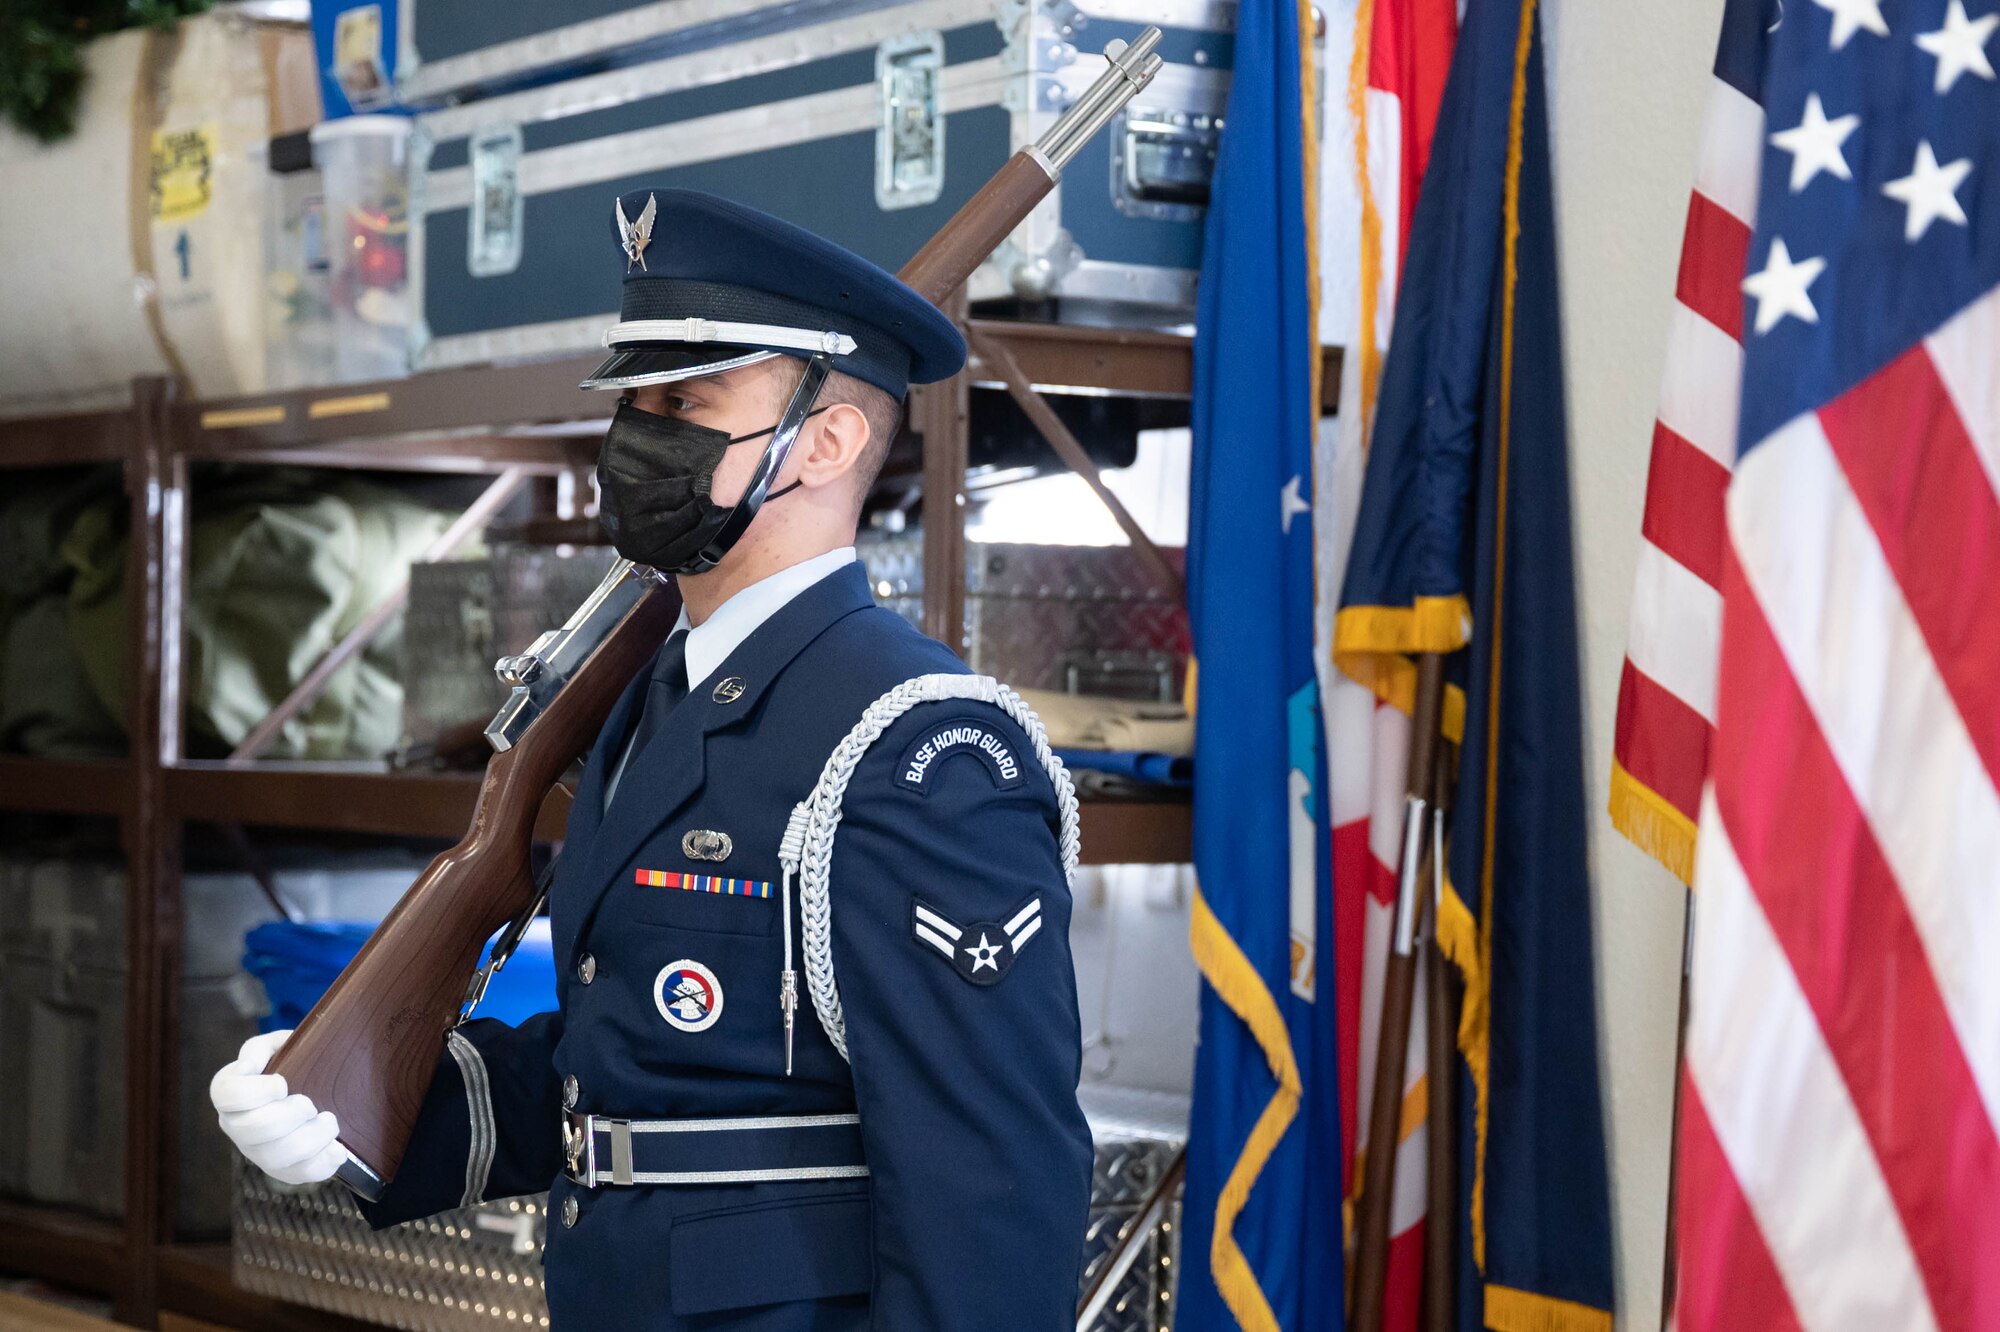 Airman 1st Class Cesar Tapia-Caballero, 341st Contracting Squadron contracting apprentice and current 341st Missile Wing Base Honor Guard honor guardsman, practices proper form while holding a ceremonial rifle April 13, 2021 at Malmstrom Air Force Base, Mont.